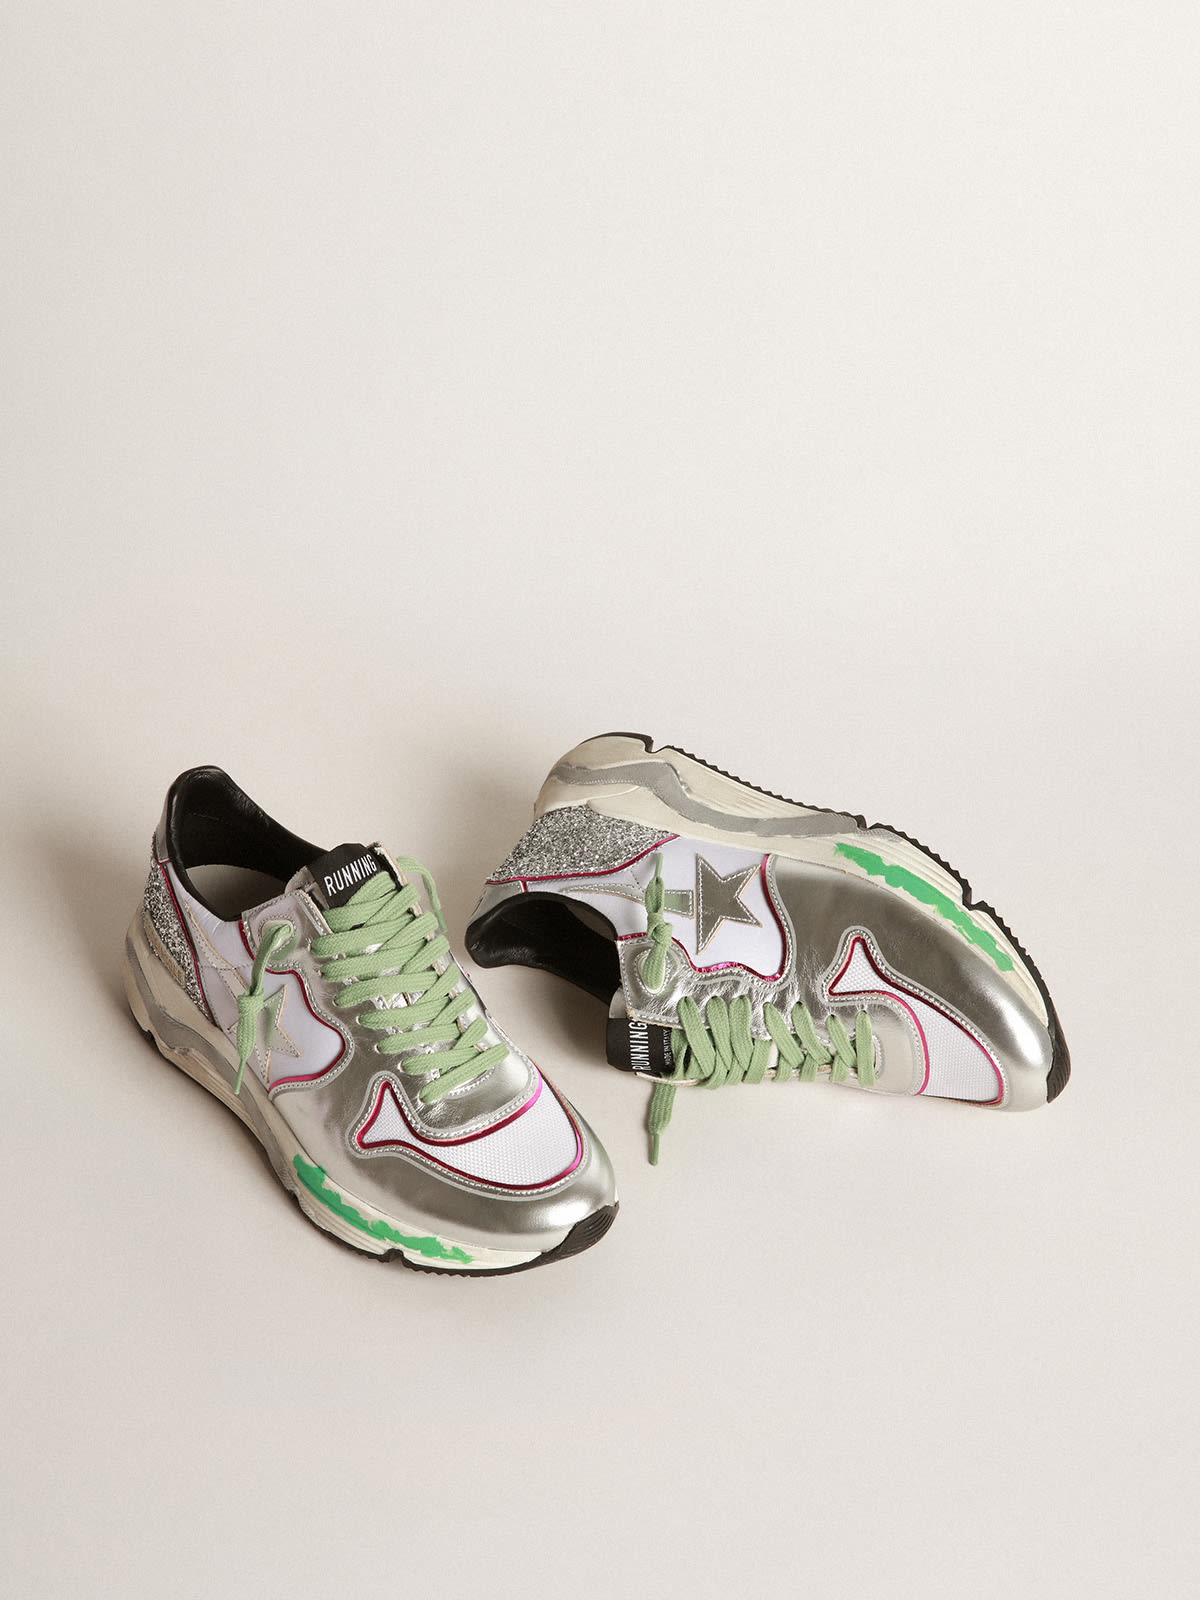 Golden Goose - Silver Running Sole sneakers with glitter and fuchsia edging in 